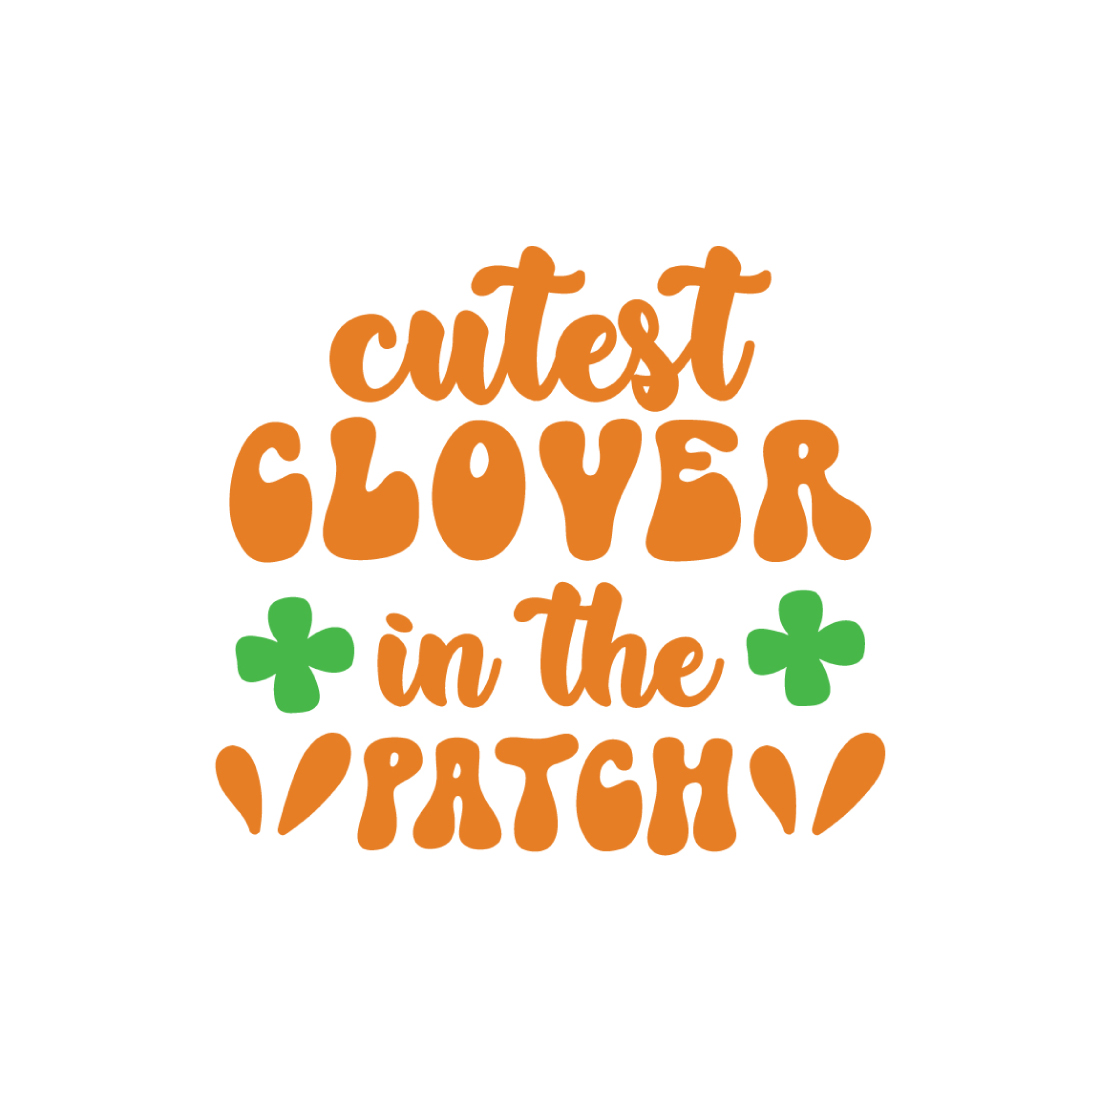 cutest clover in the patch SVG preview image.